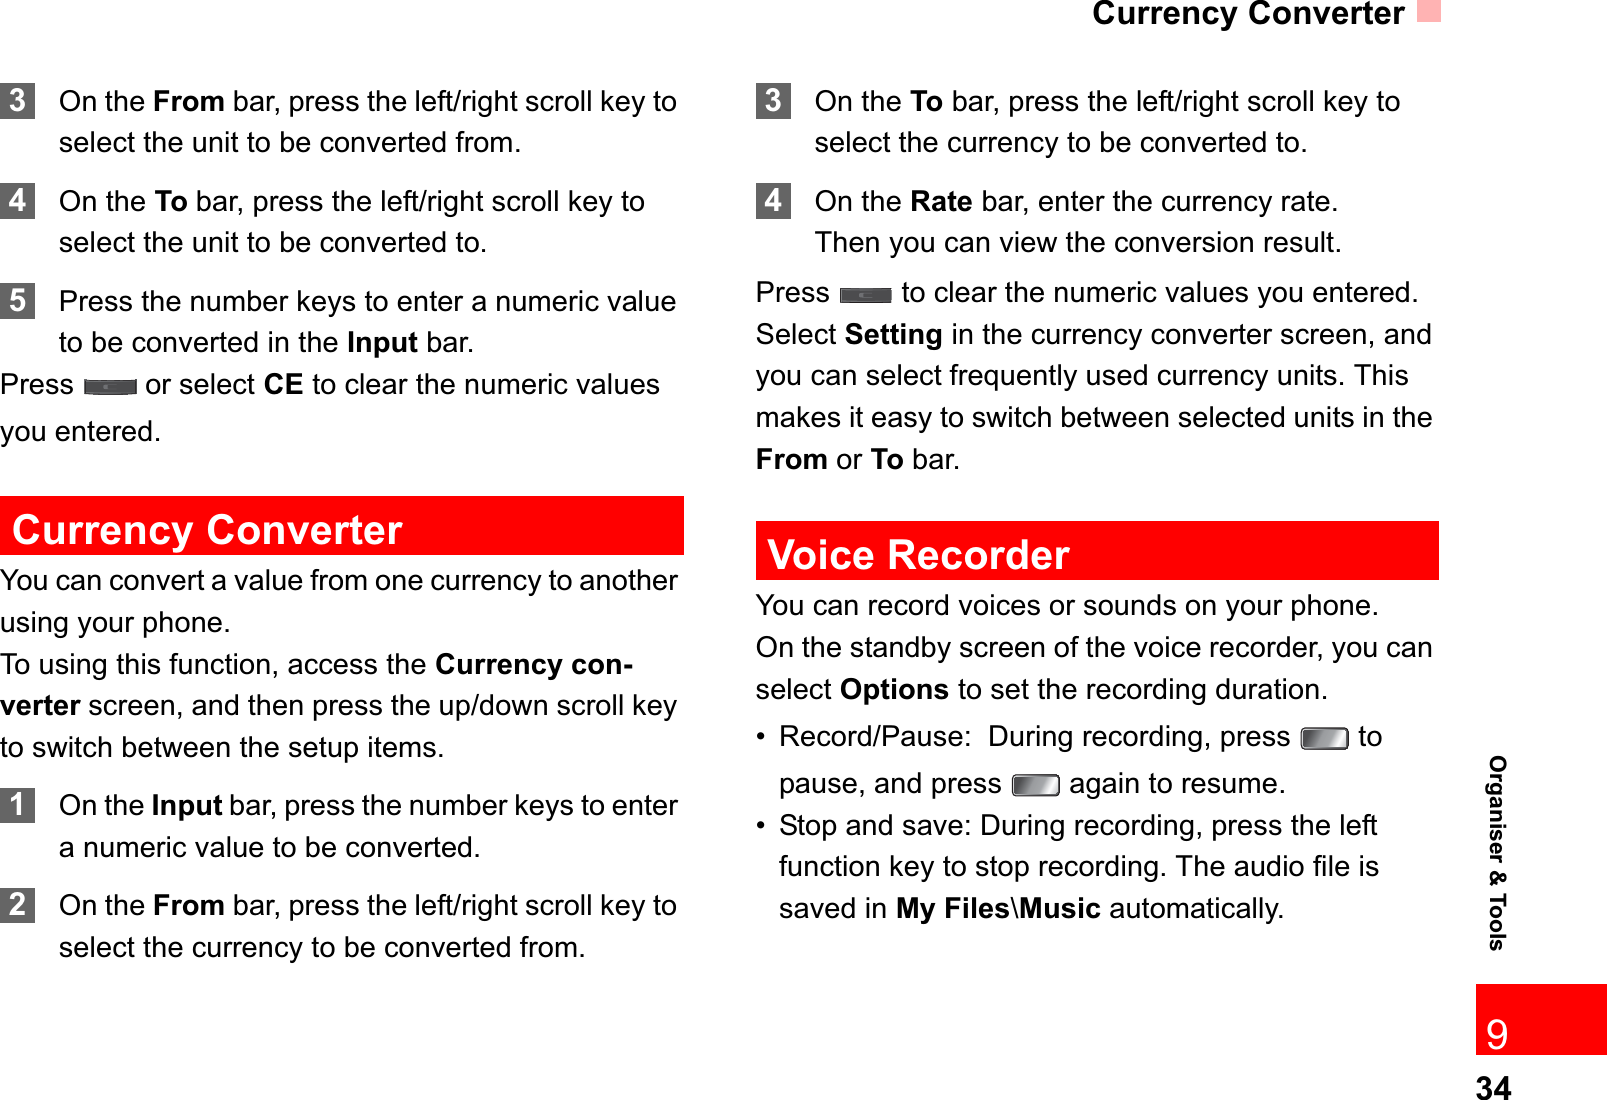 Currency Converter34Organiser &amp; Tools93On the From bar, press the left/right scroll key to select the unit to be converted from.4On the To bar, press the left/right scroll key to select the unit to be converted to.5Press the number keys to enter a numeric value to be converted in the Input bar. Press   or select CE to clear the numeric values you entered.Currency ConverterYou can convert a value from one currency to another using your phone.To using this function, access the Currency con-verter screen, and then press the up/down scroll key to switch between the setup items.1On the Input bar, press the number keys to enter a numeric value to be converted.2On the From bar, press the left/right scroll key to select the currency to be converted from.3On the To bar, press the left/right scroll key to select the currency to be converted to.4On the Rate bar, enter the currency rate.Then you can view the conversion result.Press   to clear the numeric values you entered.Select Setting in the currency converter screen, and you can select frequently used currency units. This makes it easy to switch between selected units in the From or To bar.Voice RecorderYou can record voices or sounds on your phone.  On the standby screen of the voice recorder, you can select Options to set the recording duration.• Record/Pause:  During recording, press   to pause, and press   again to resume.• Stop and save: During recording, press the left function key to stop recording. The audio file is saved in My Files\Music automatically.